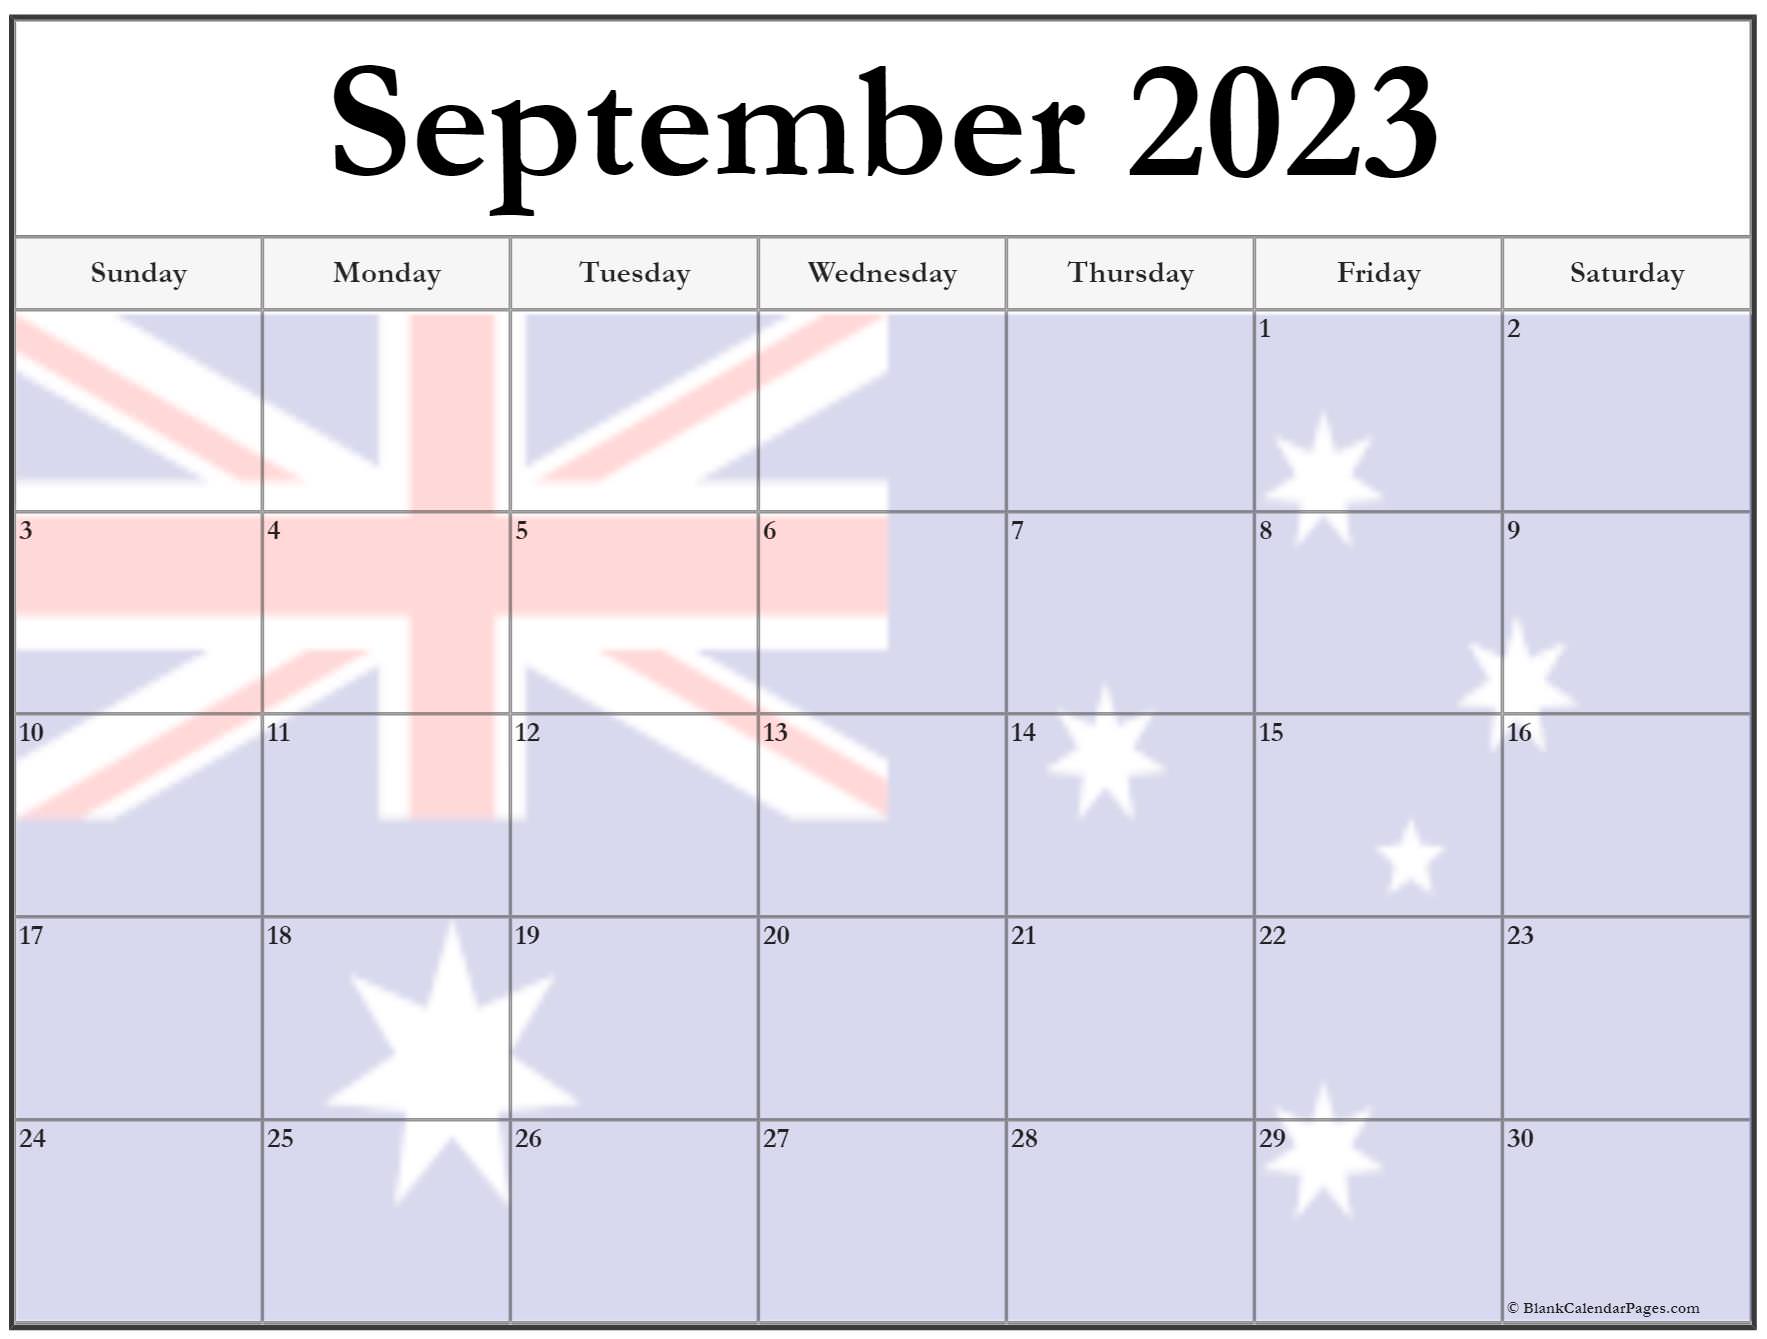 Collection of September 2023 photo calendars with image filters.